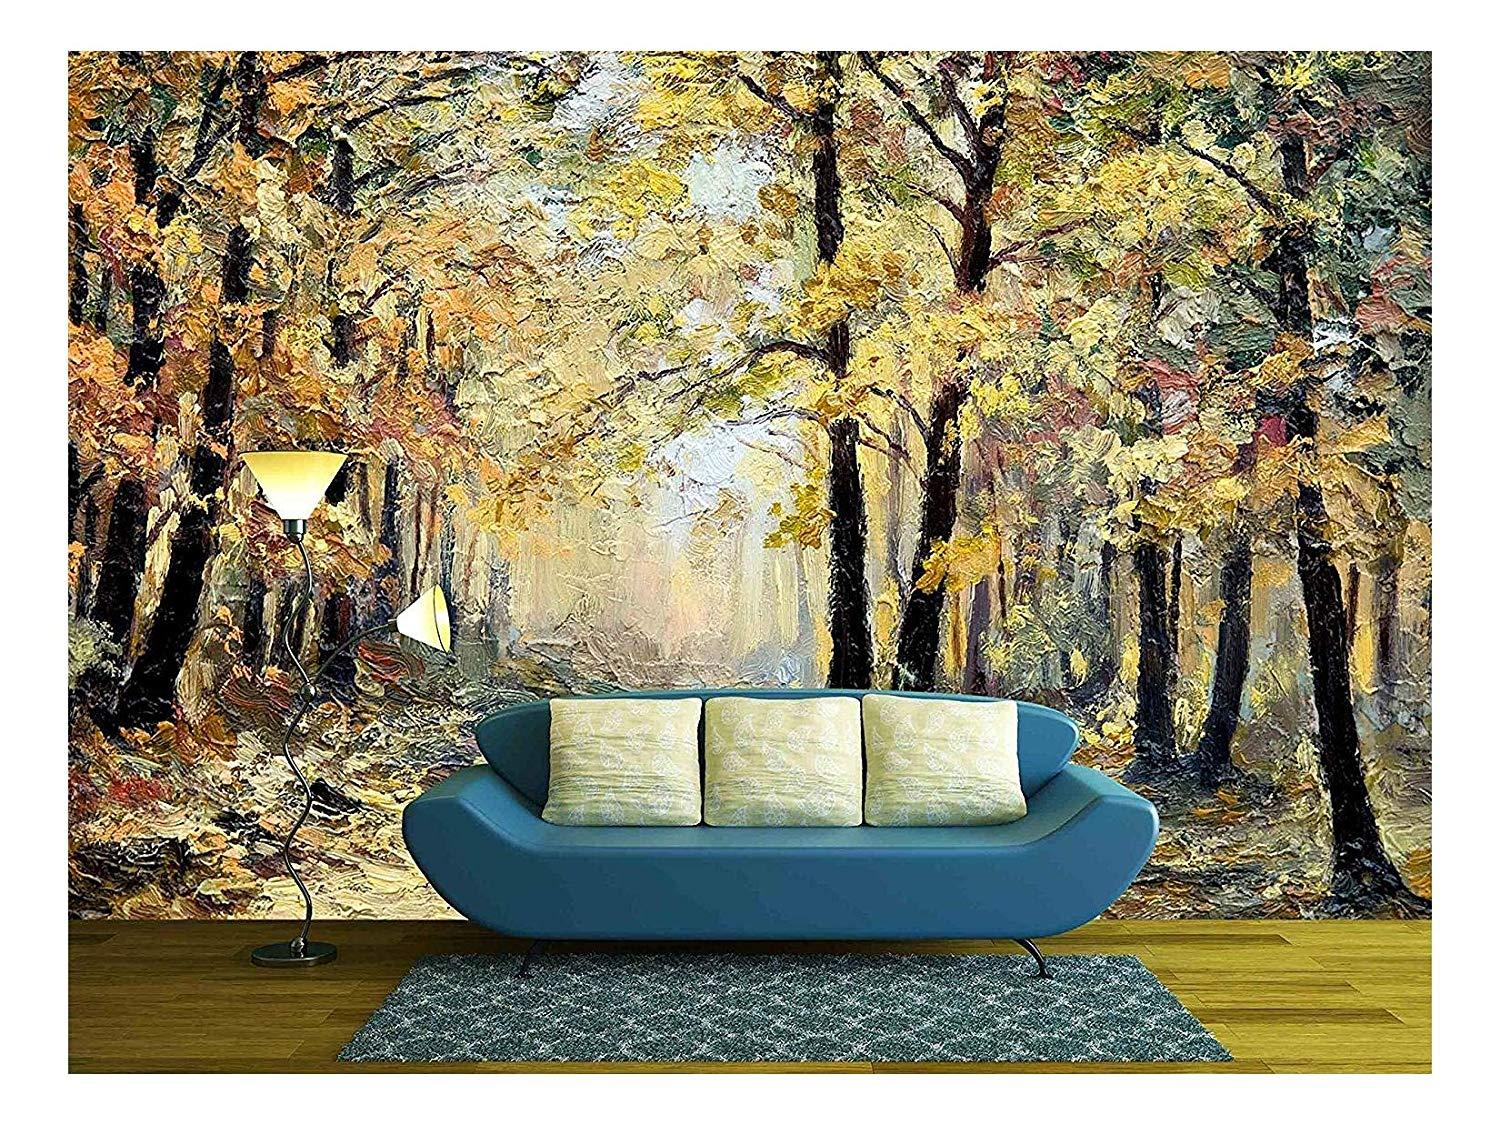 1500 x 1125 · jpeg - wall26 - Oil Painting Landscape - Autumn Forest, Full of Fallen Leaves ...